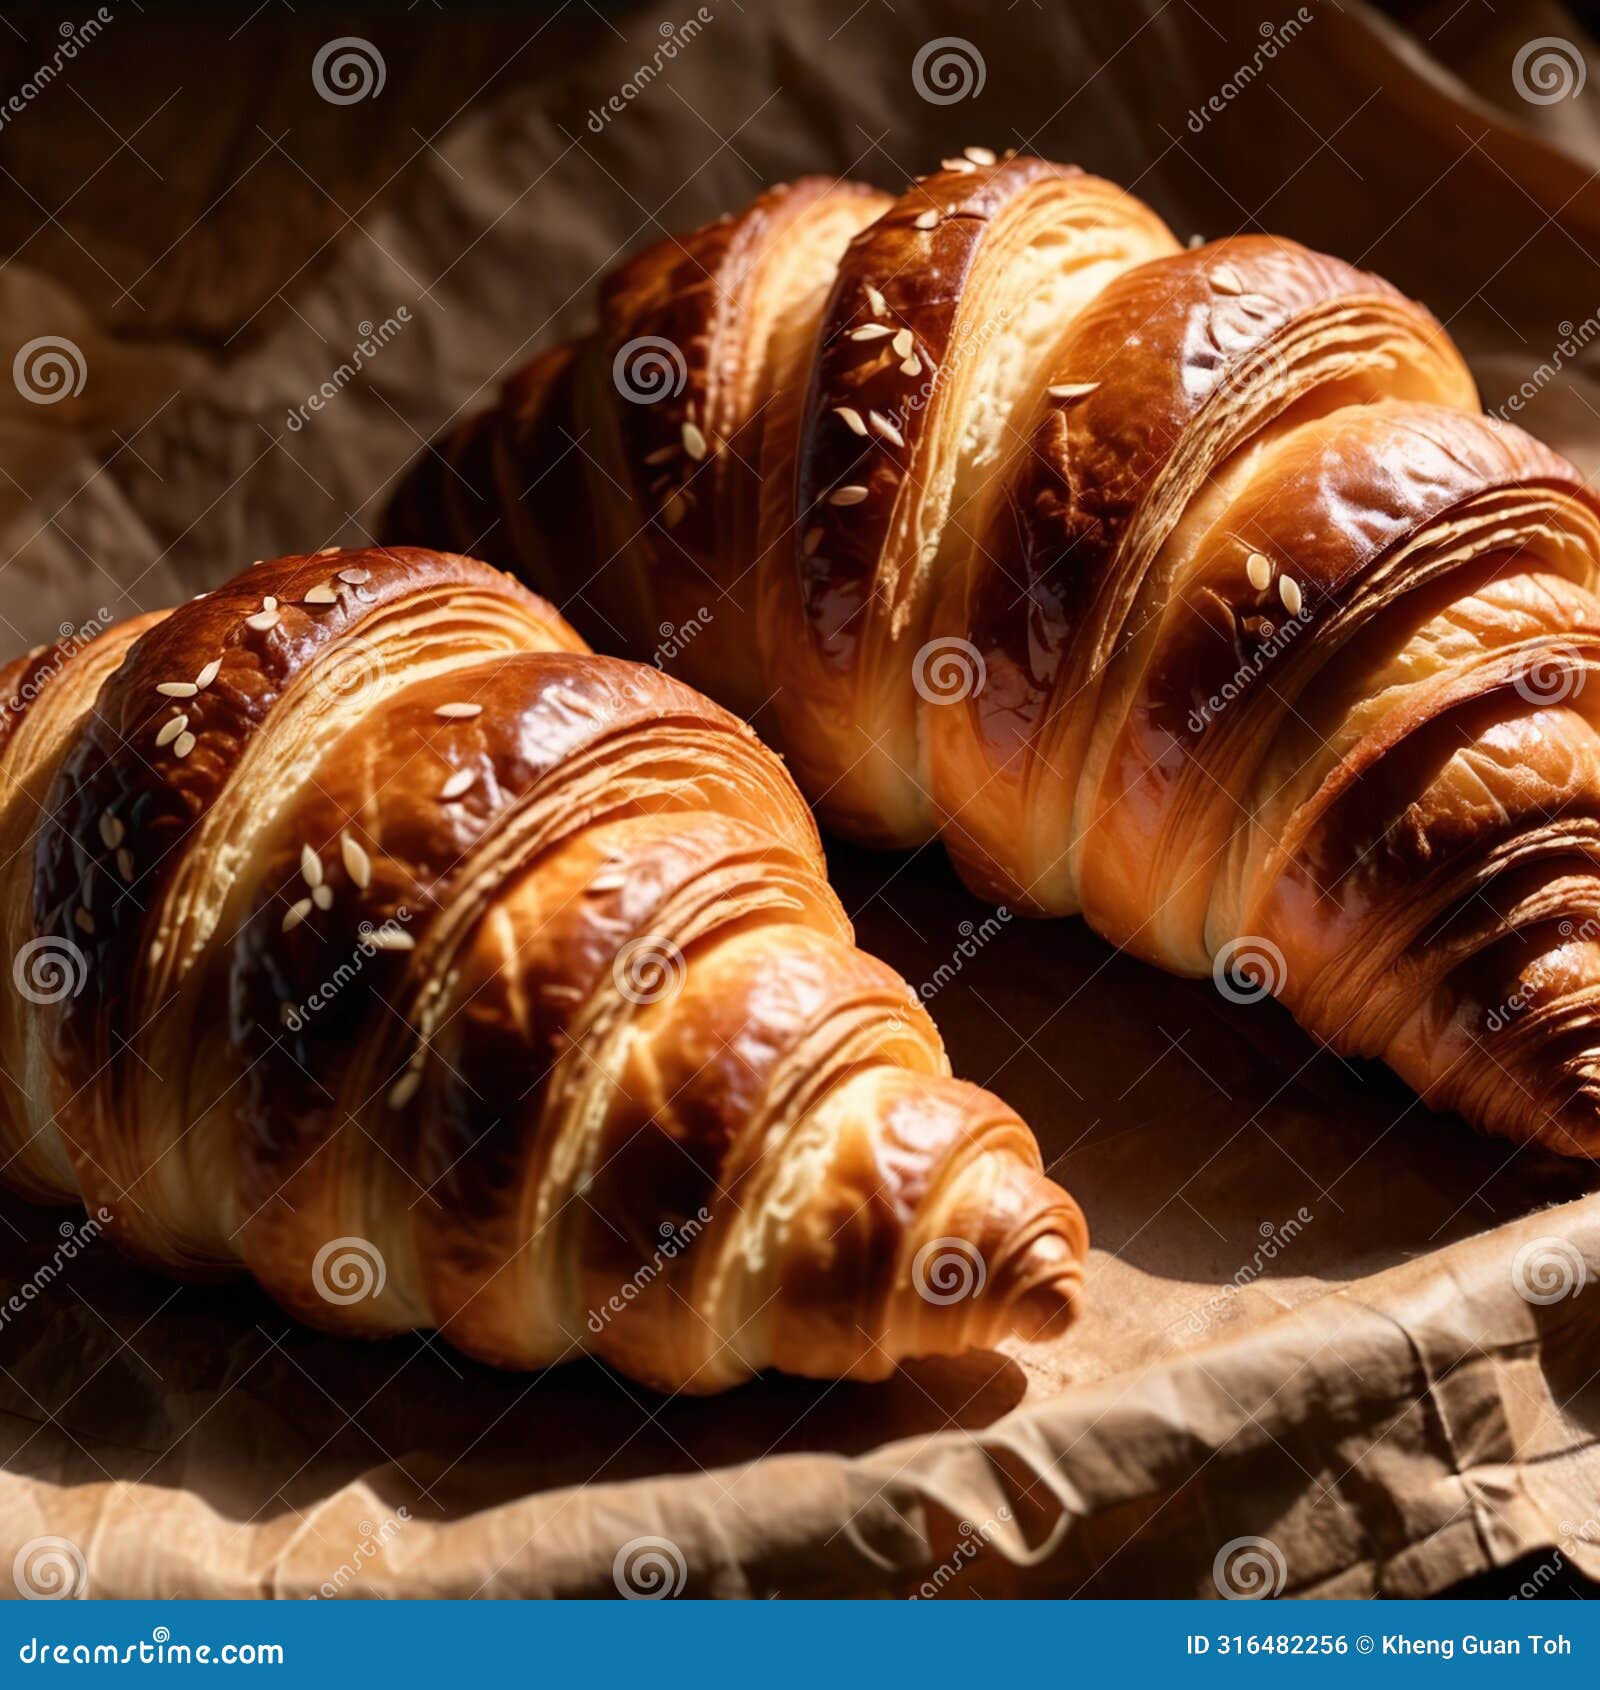 croissant, traditional french flaky pastry, dessert or snack bread